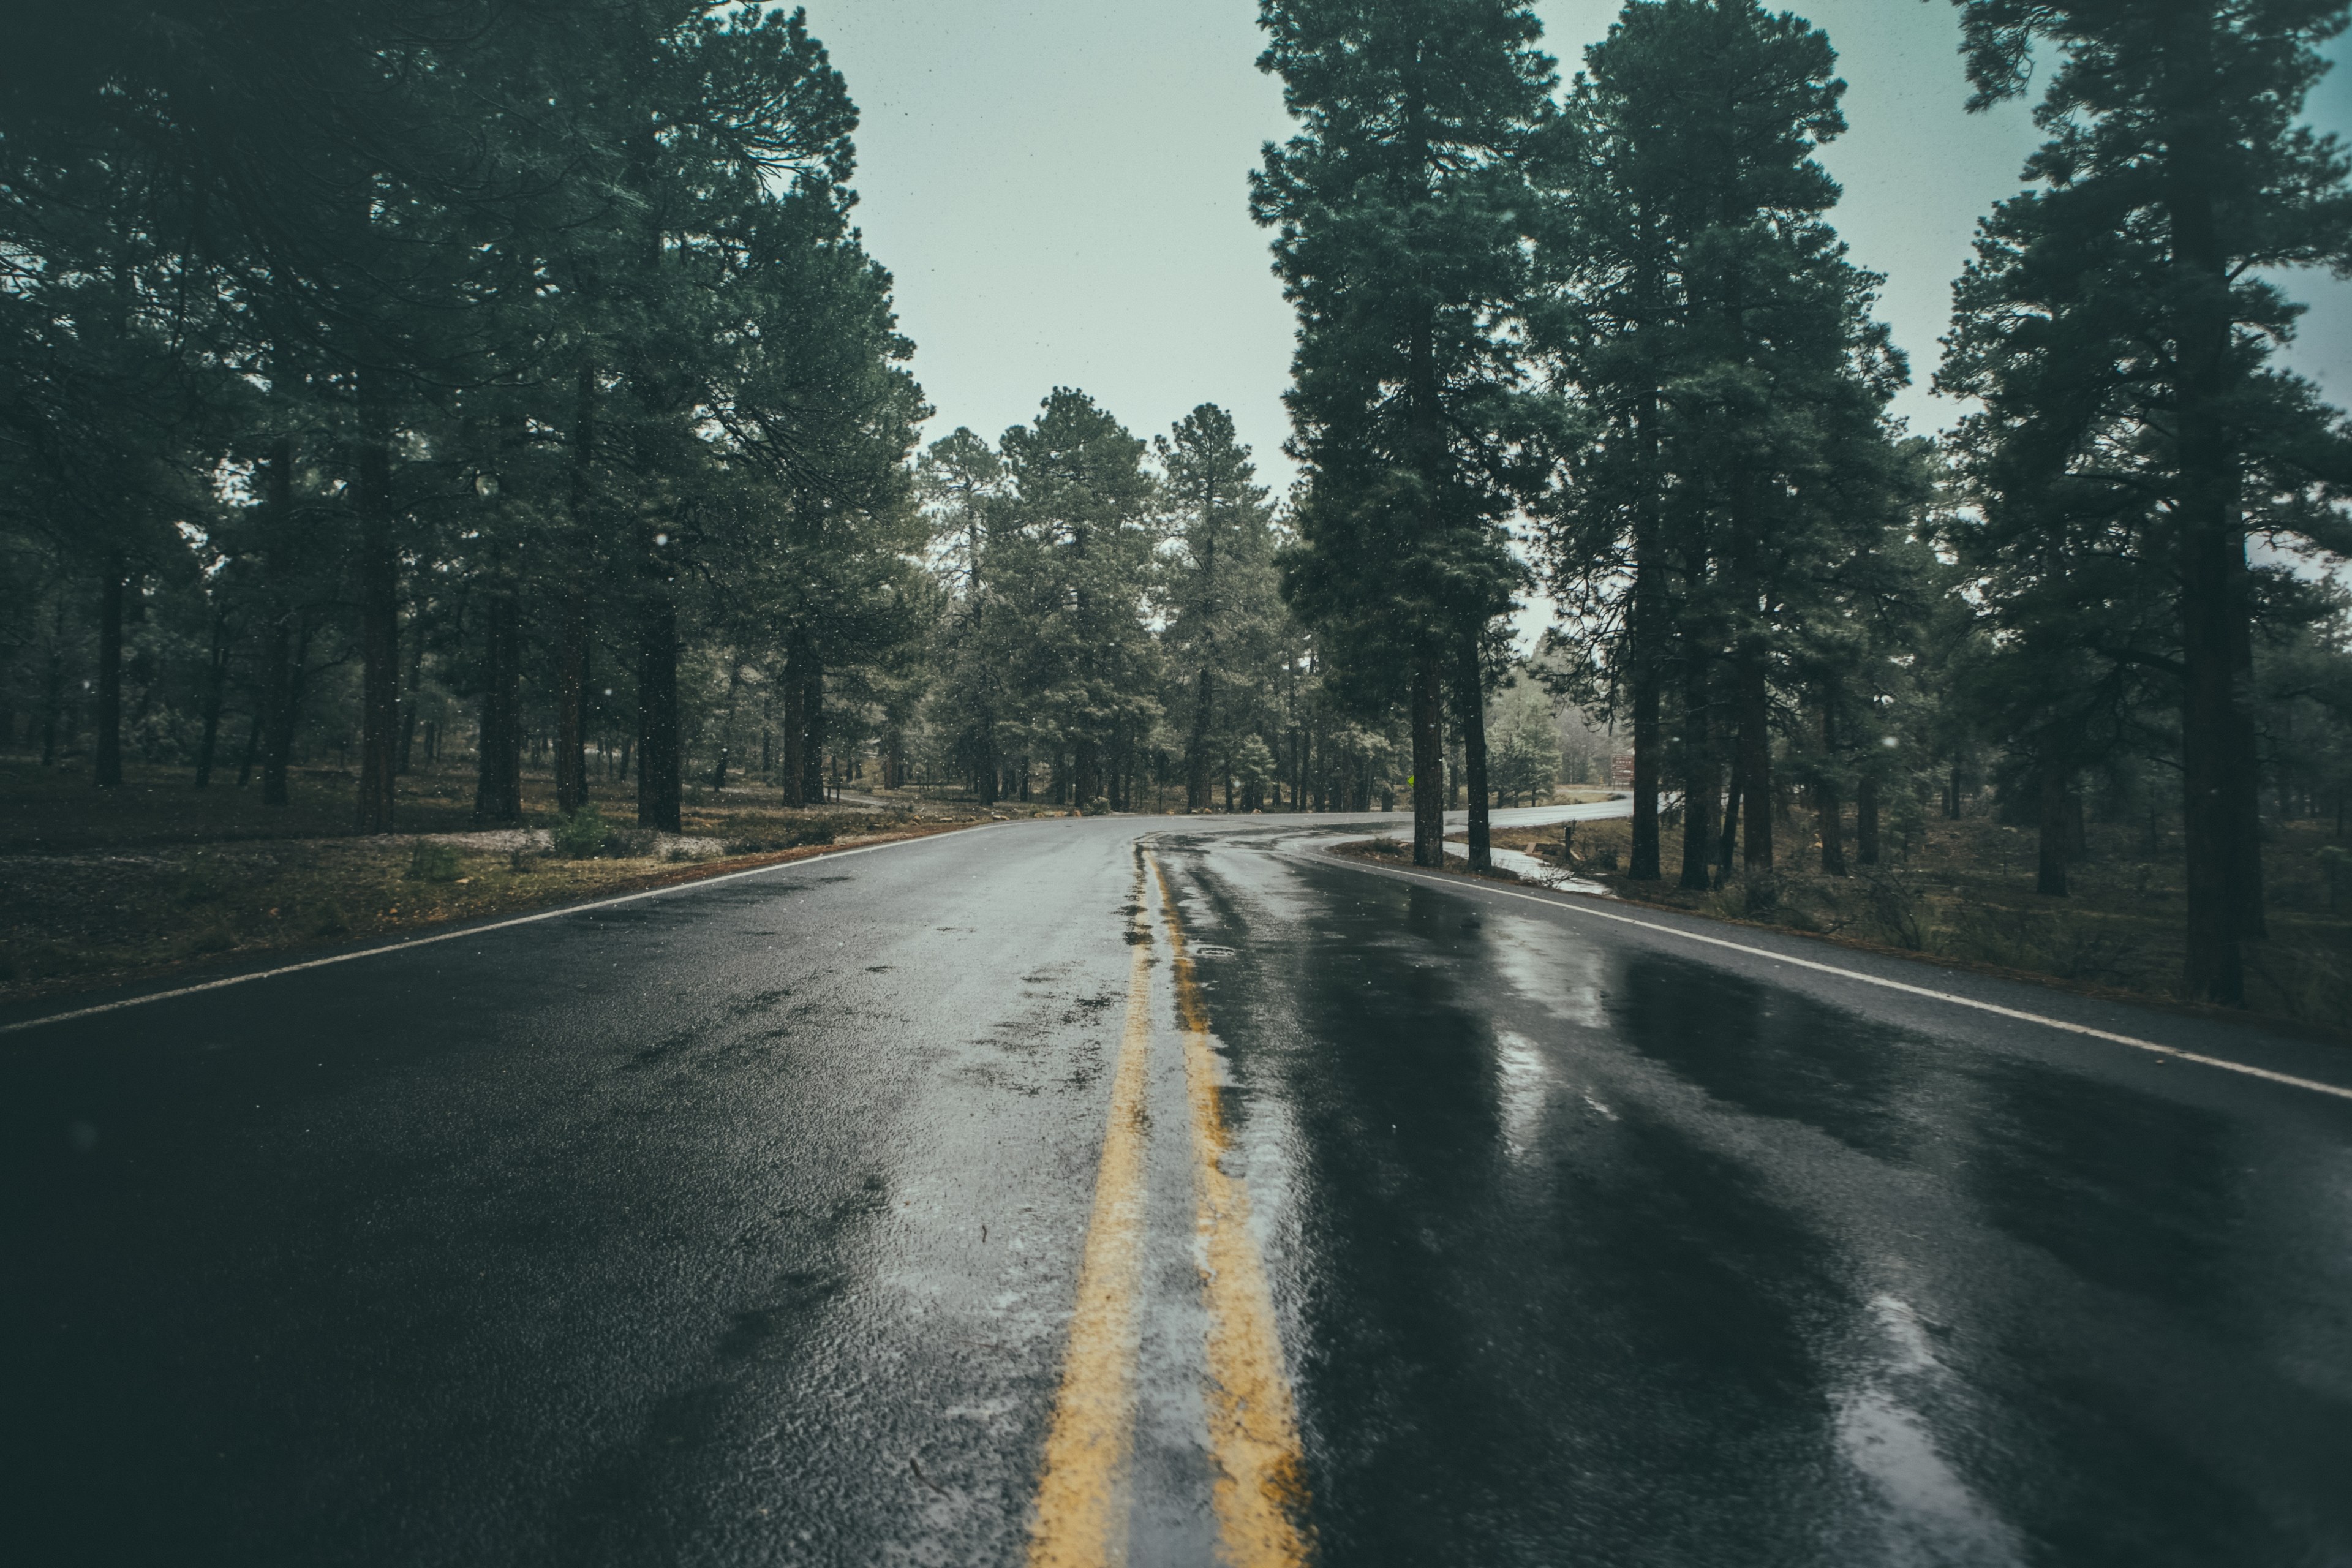 road wet bend and curve hd 4k wallpaper and background